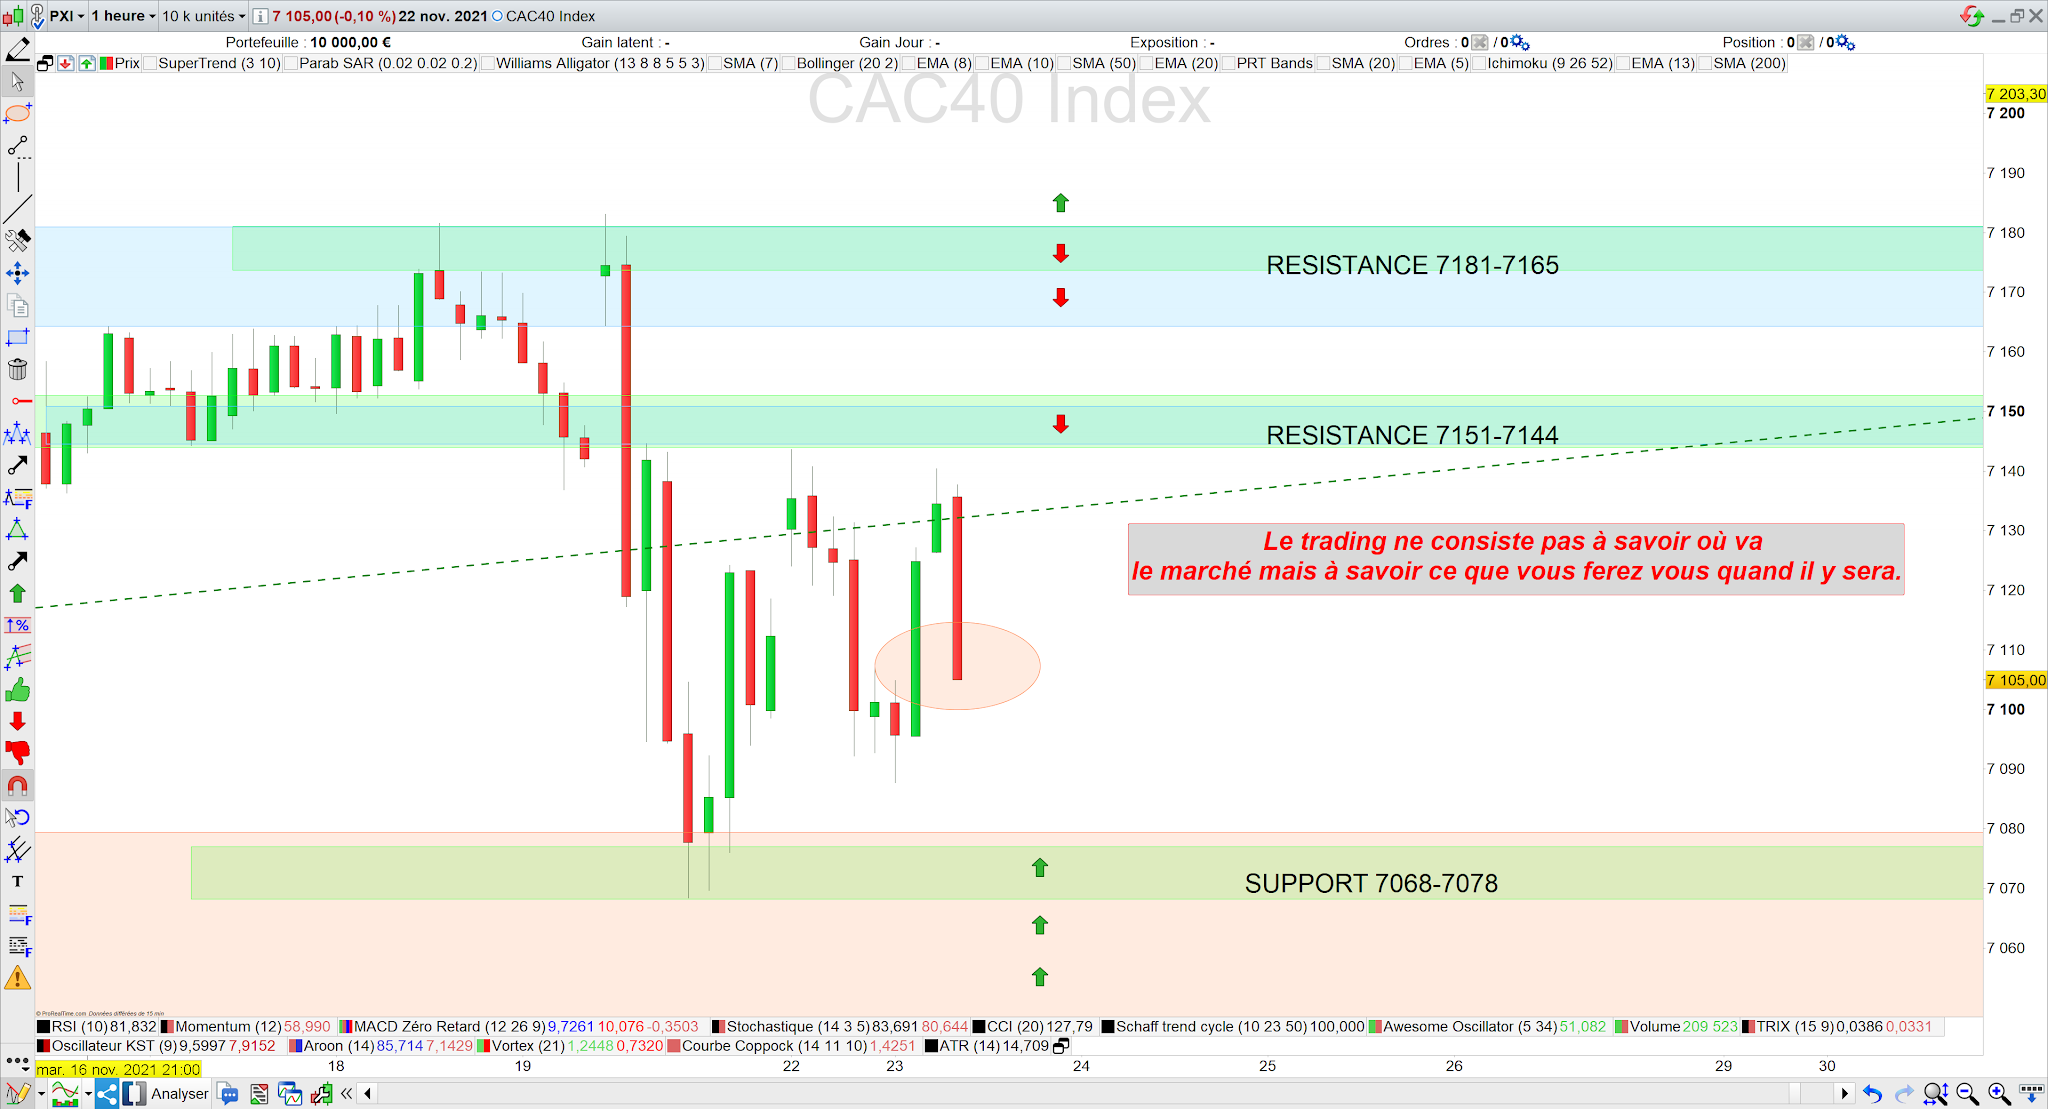 Trading cac40 23/11/21